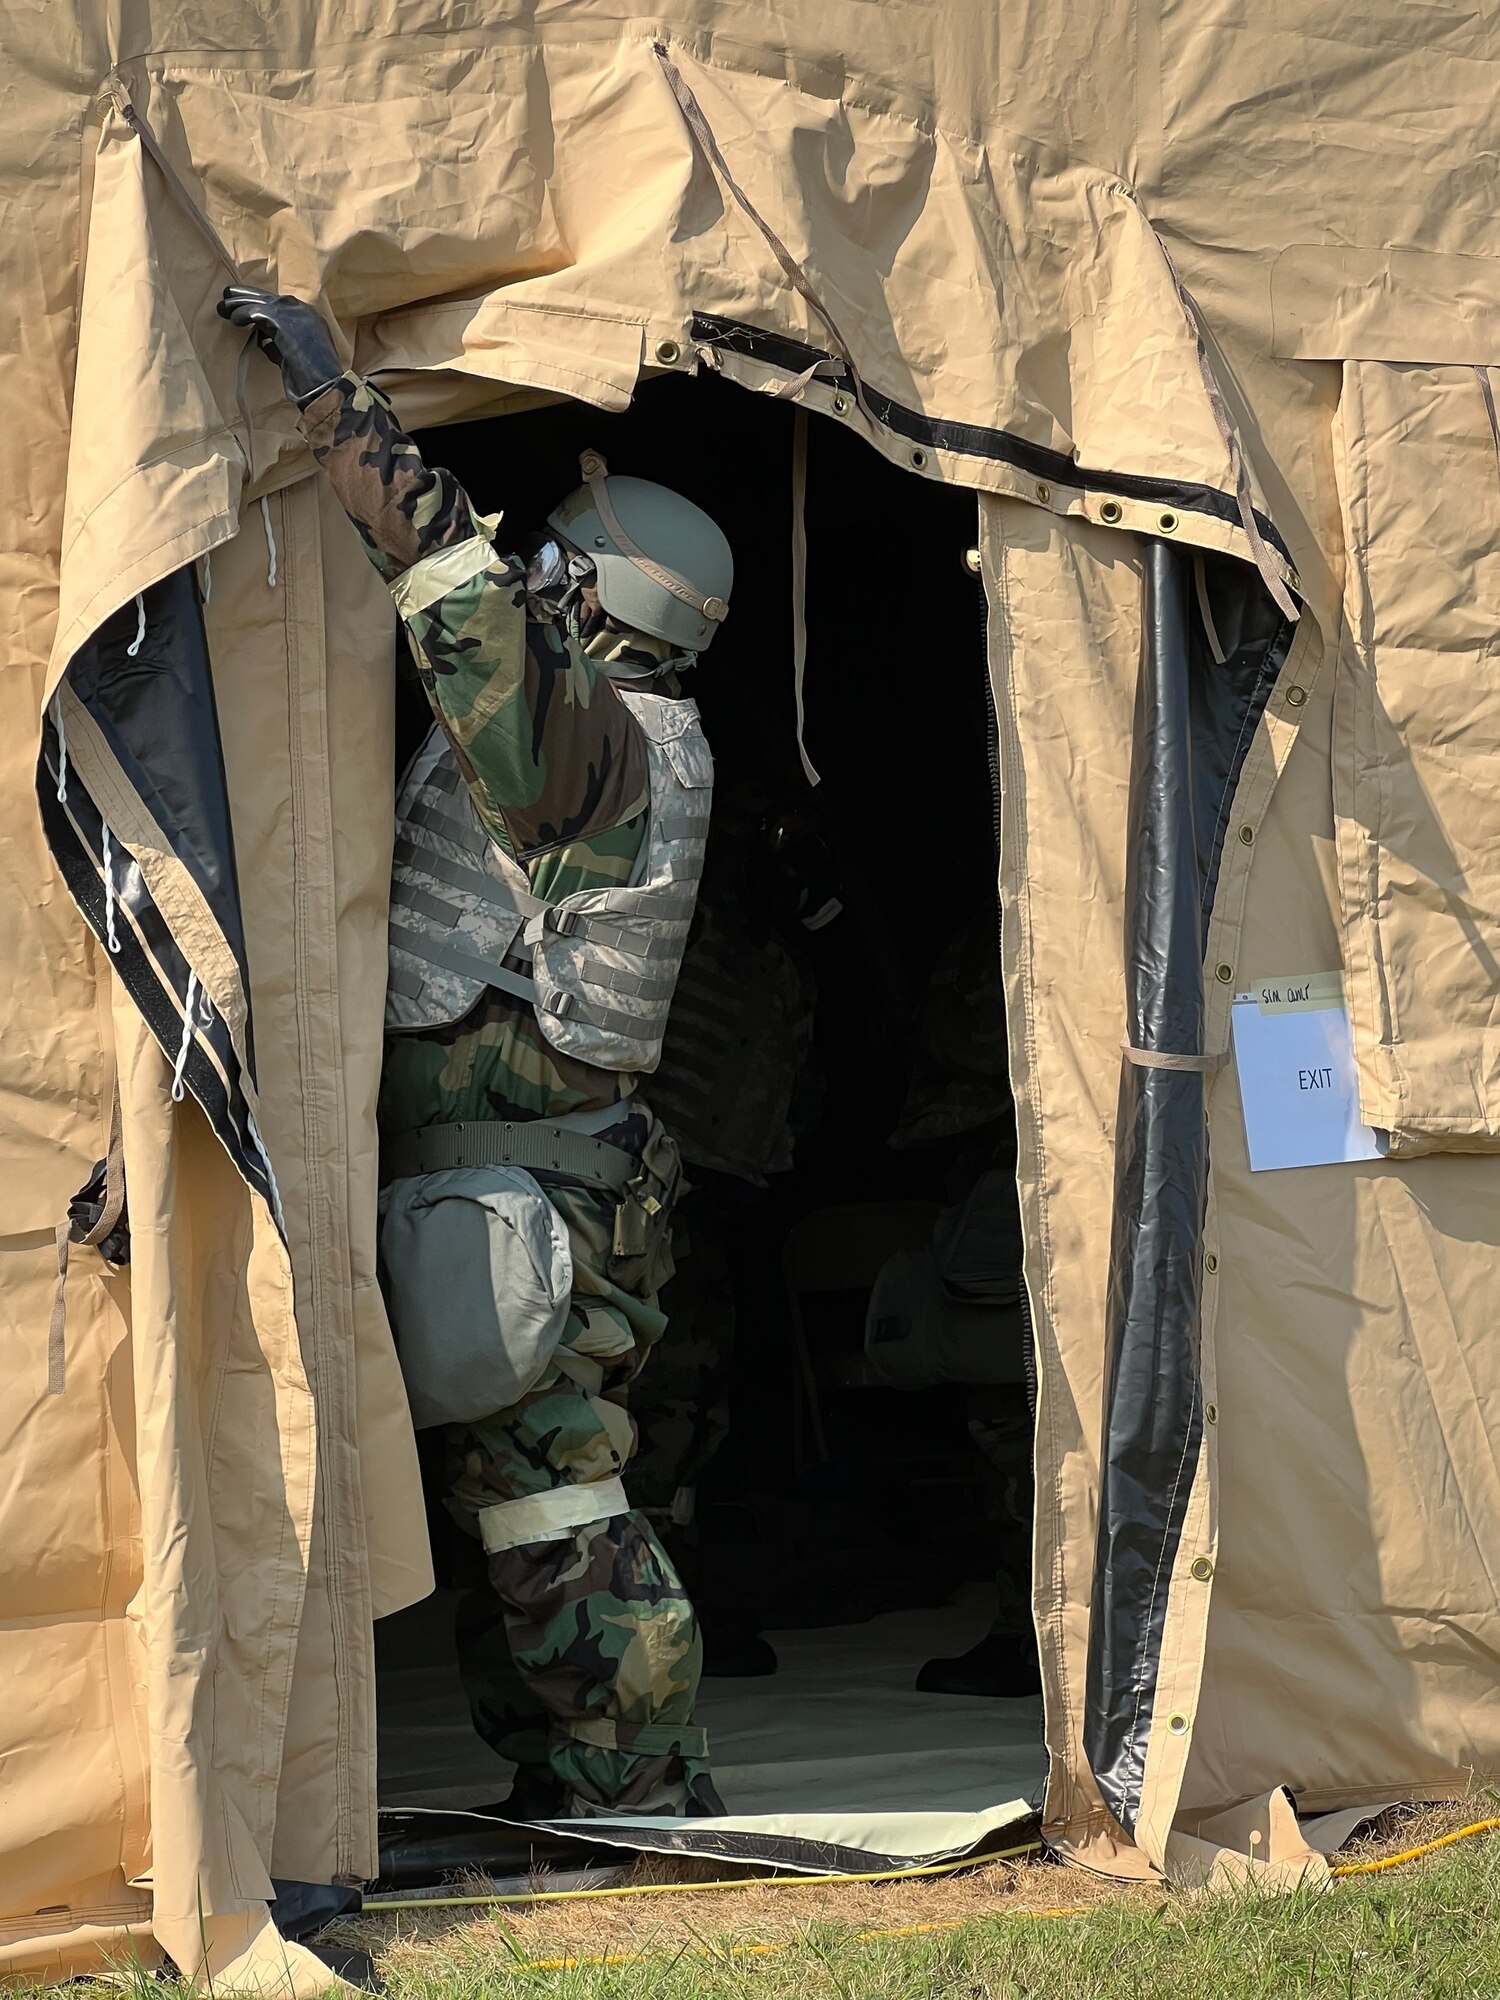 An Airman ties back a doorway on a tent during a readiness exercise on Friday, September 16, 2022 at Biddle Air National Guard Base. The Airman was responding to a simulated chemical attack while trying to maintain operations in a deployed scenario.